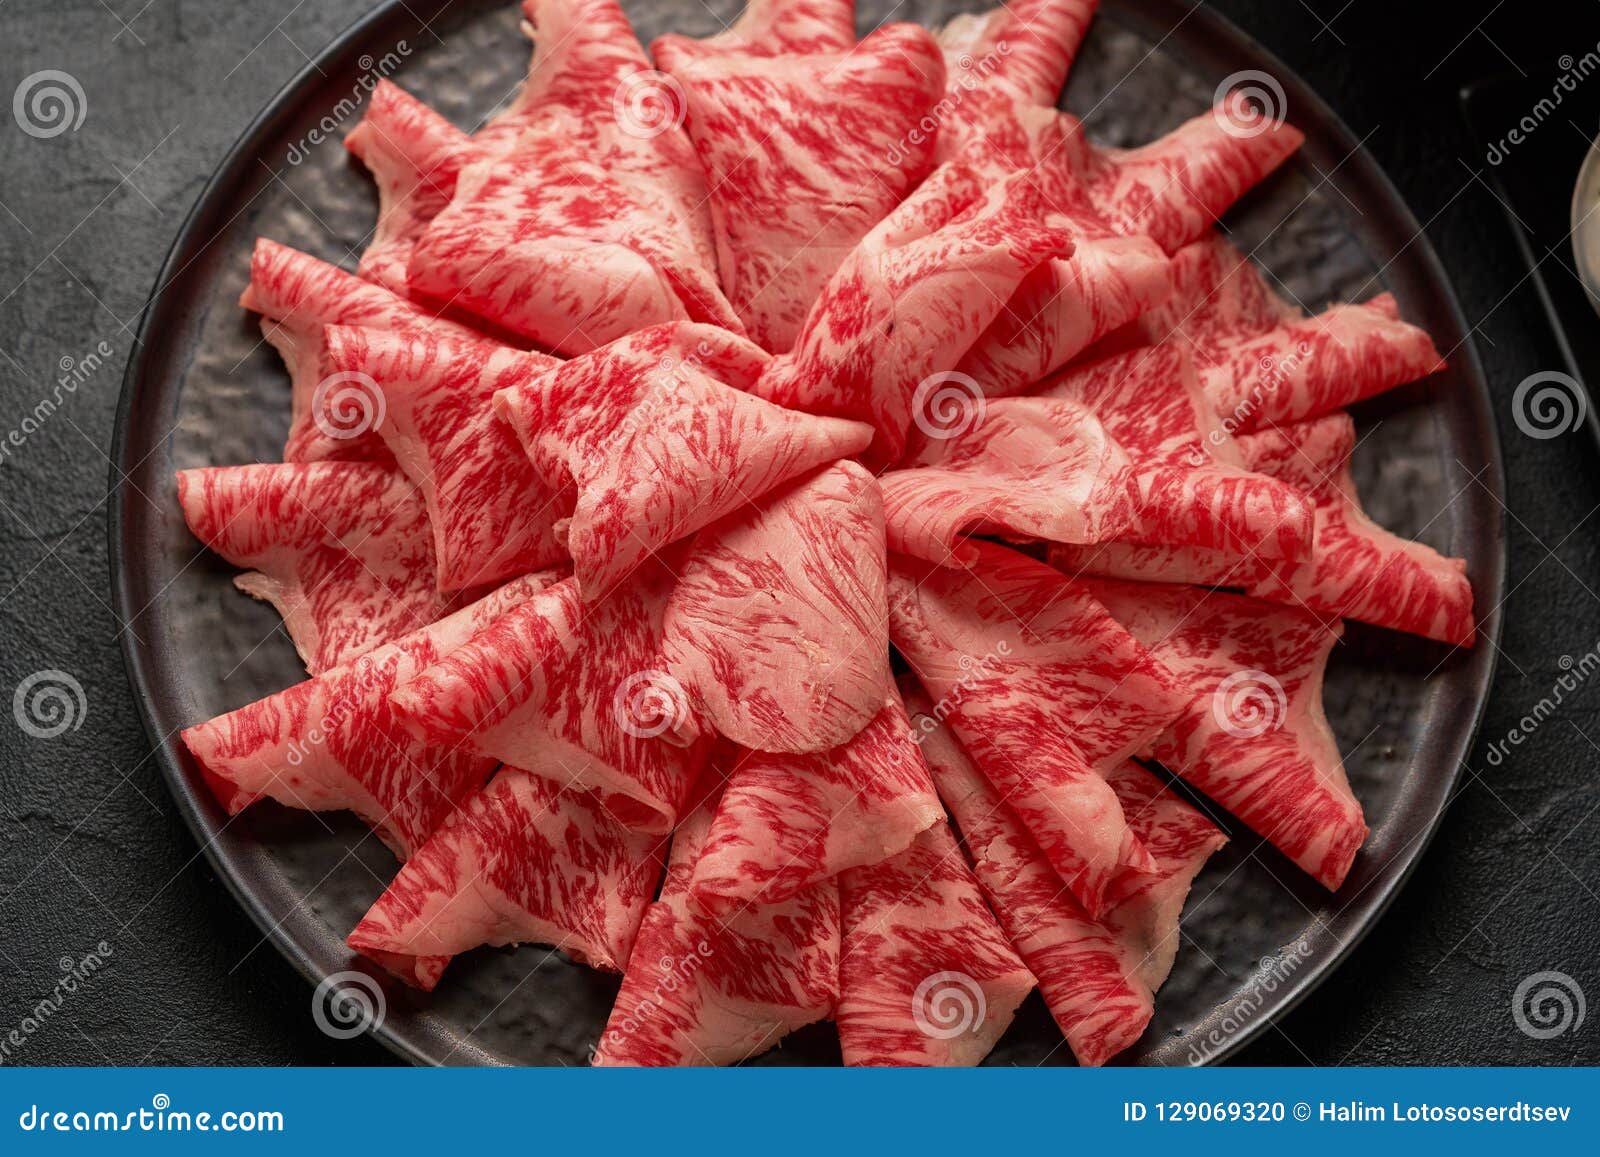 a close up detailed image of sliced japanese wagyu beef in a ceramic plate prepared for shabu shab